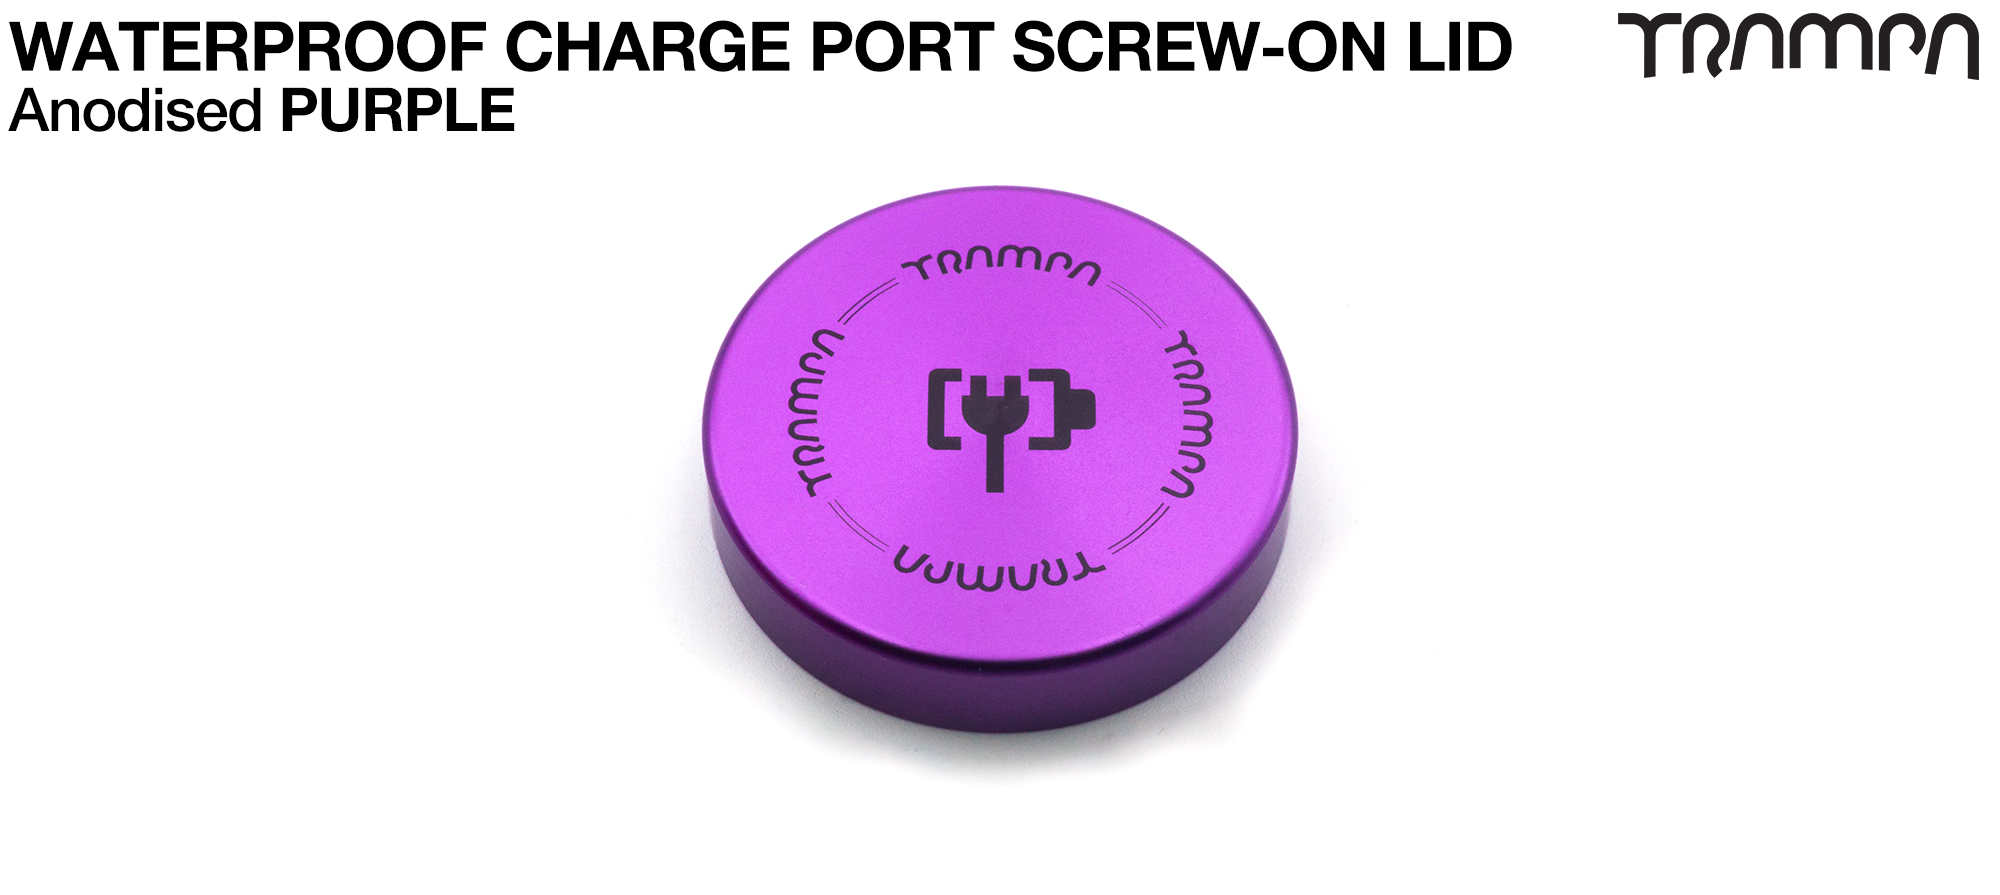 Charge Point TOP - Anodised PURPLE